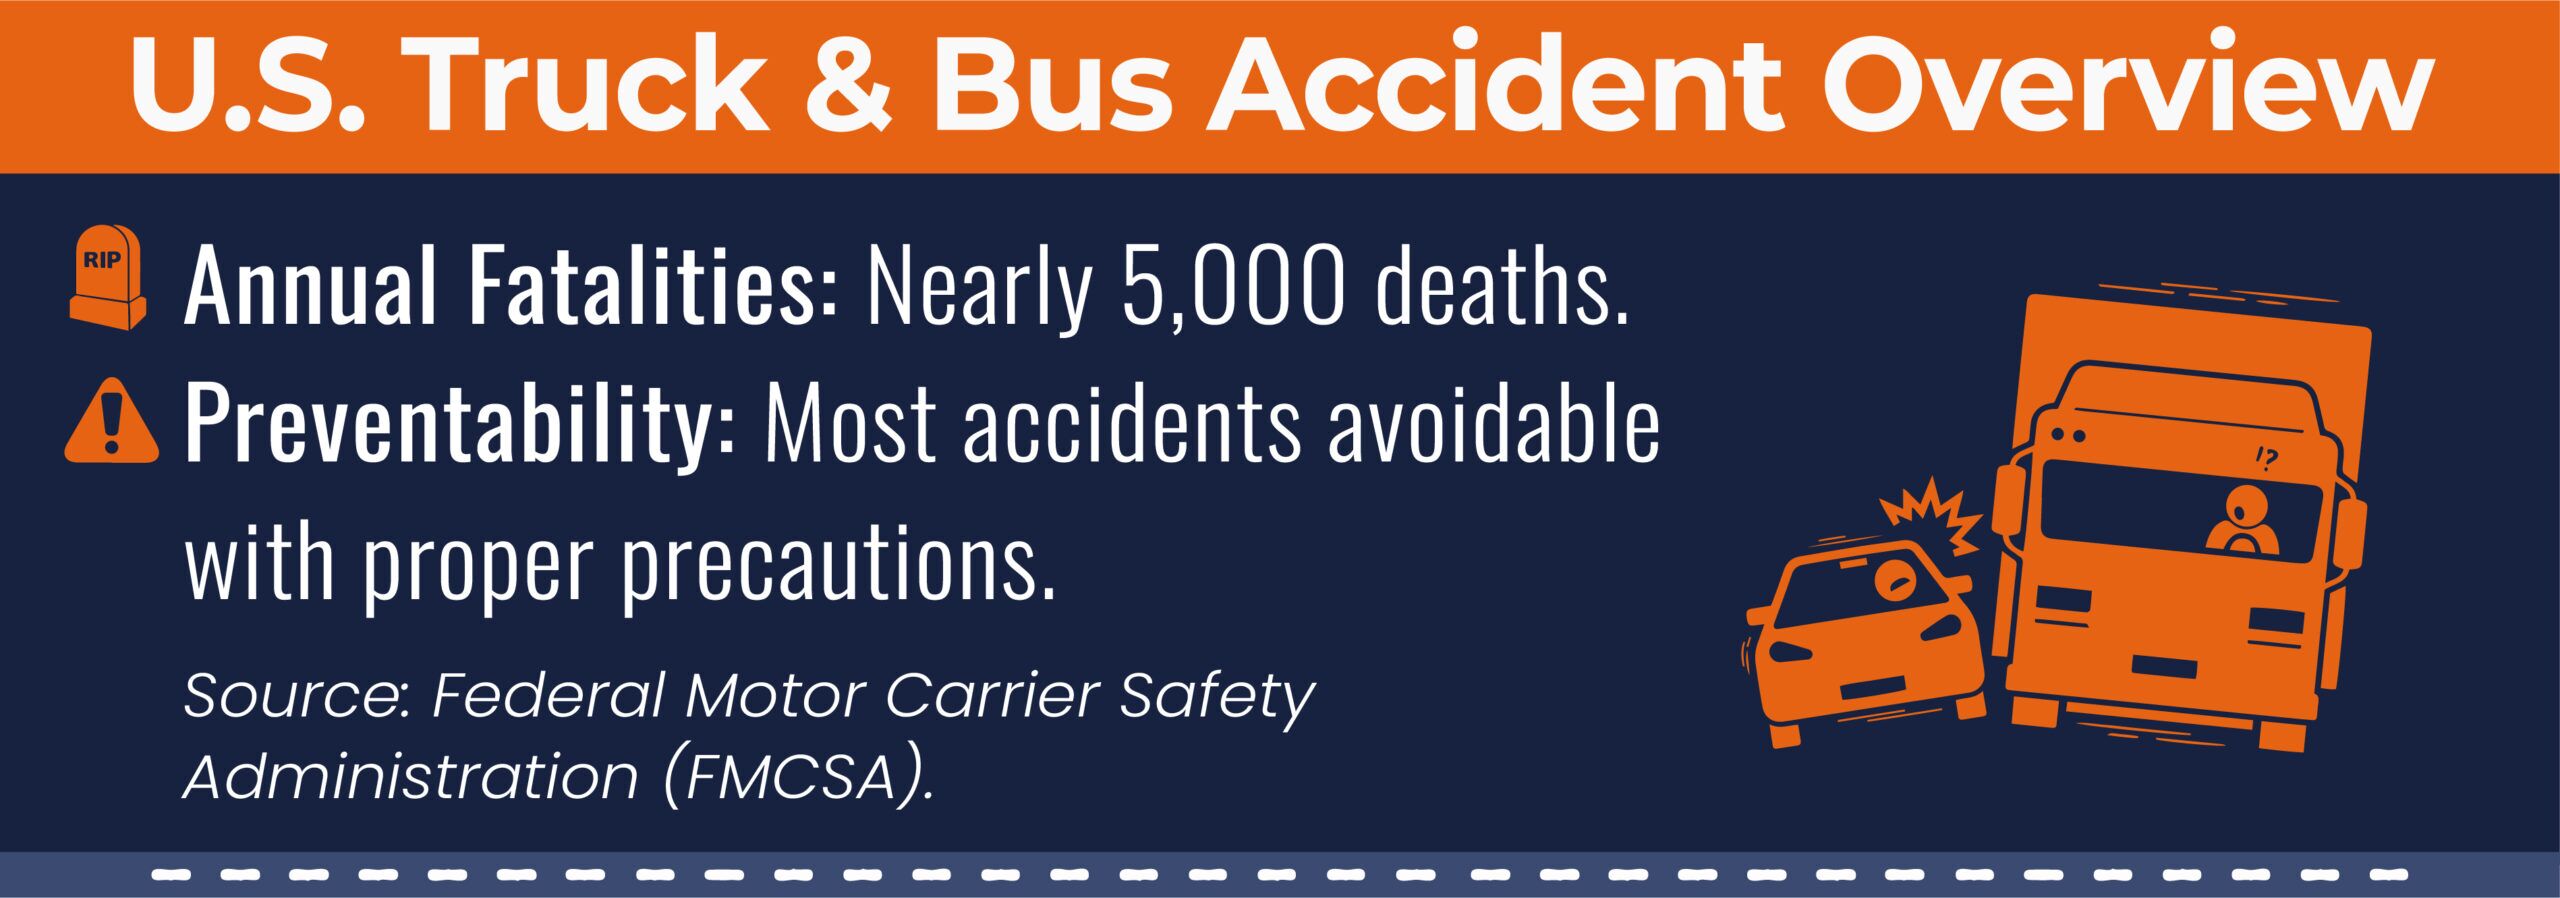 Truck and Bus Accident Overview